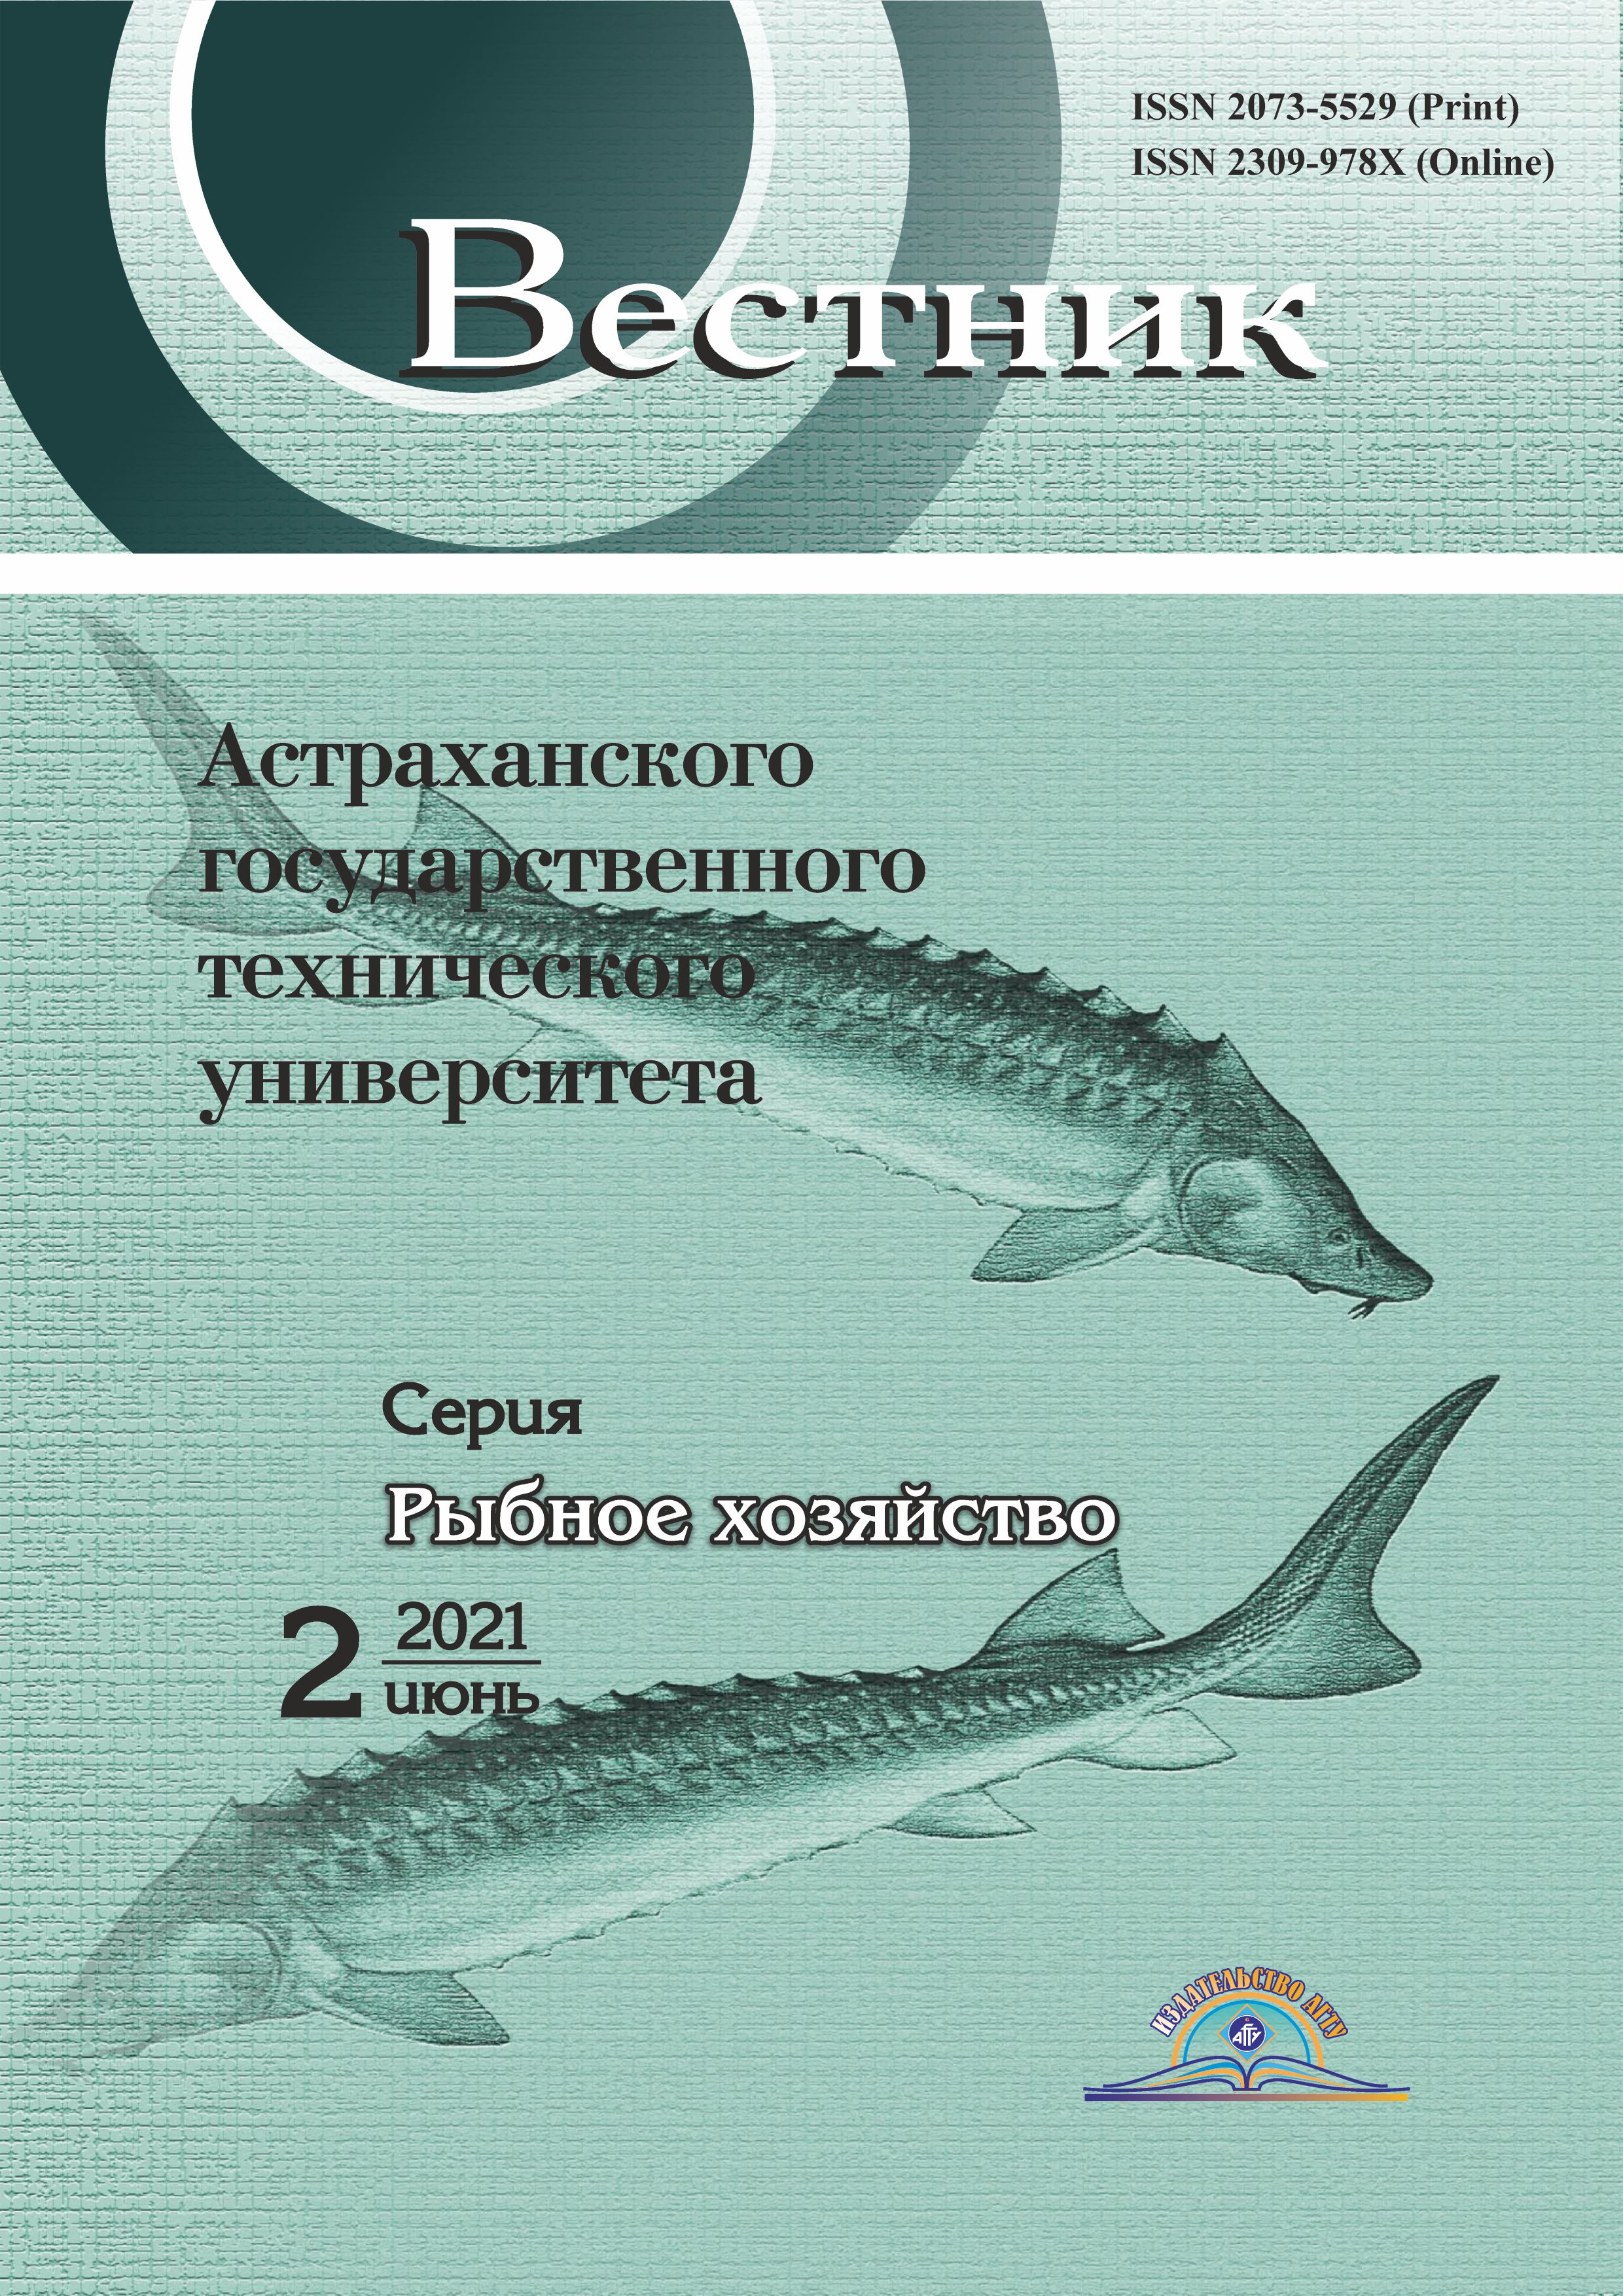             PRACTISE OF ORGANIZING LAKE COMMERCIAL FISH FARMS  IN CONDITIONS OF LAKE OZGENT
    